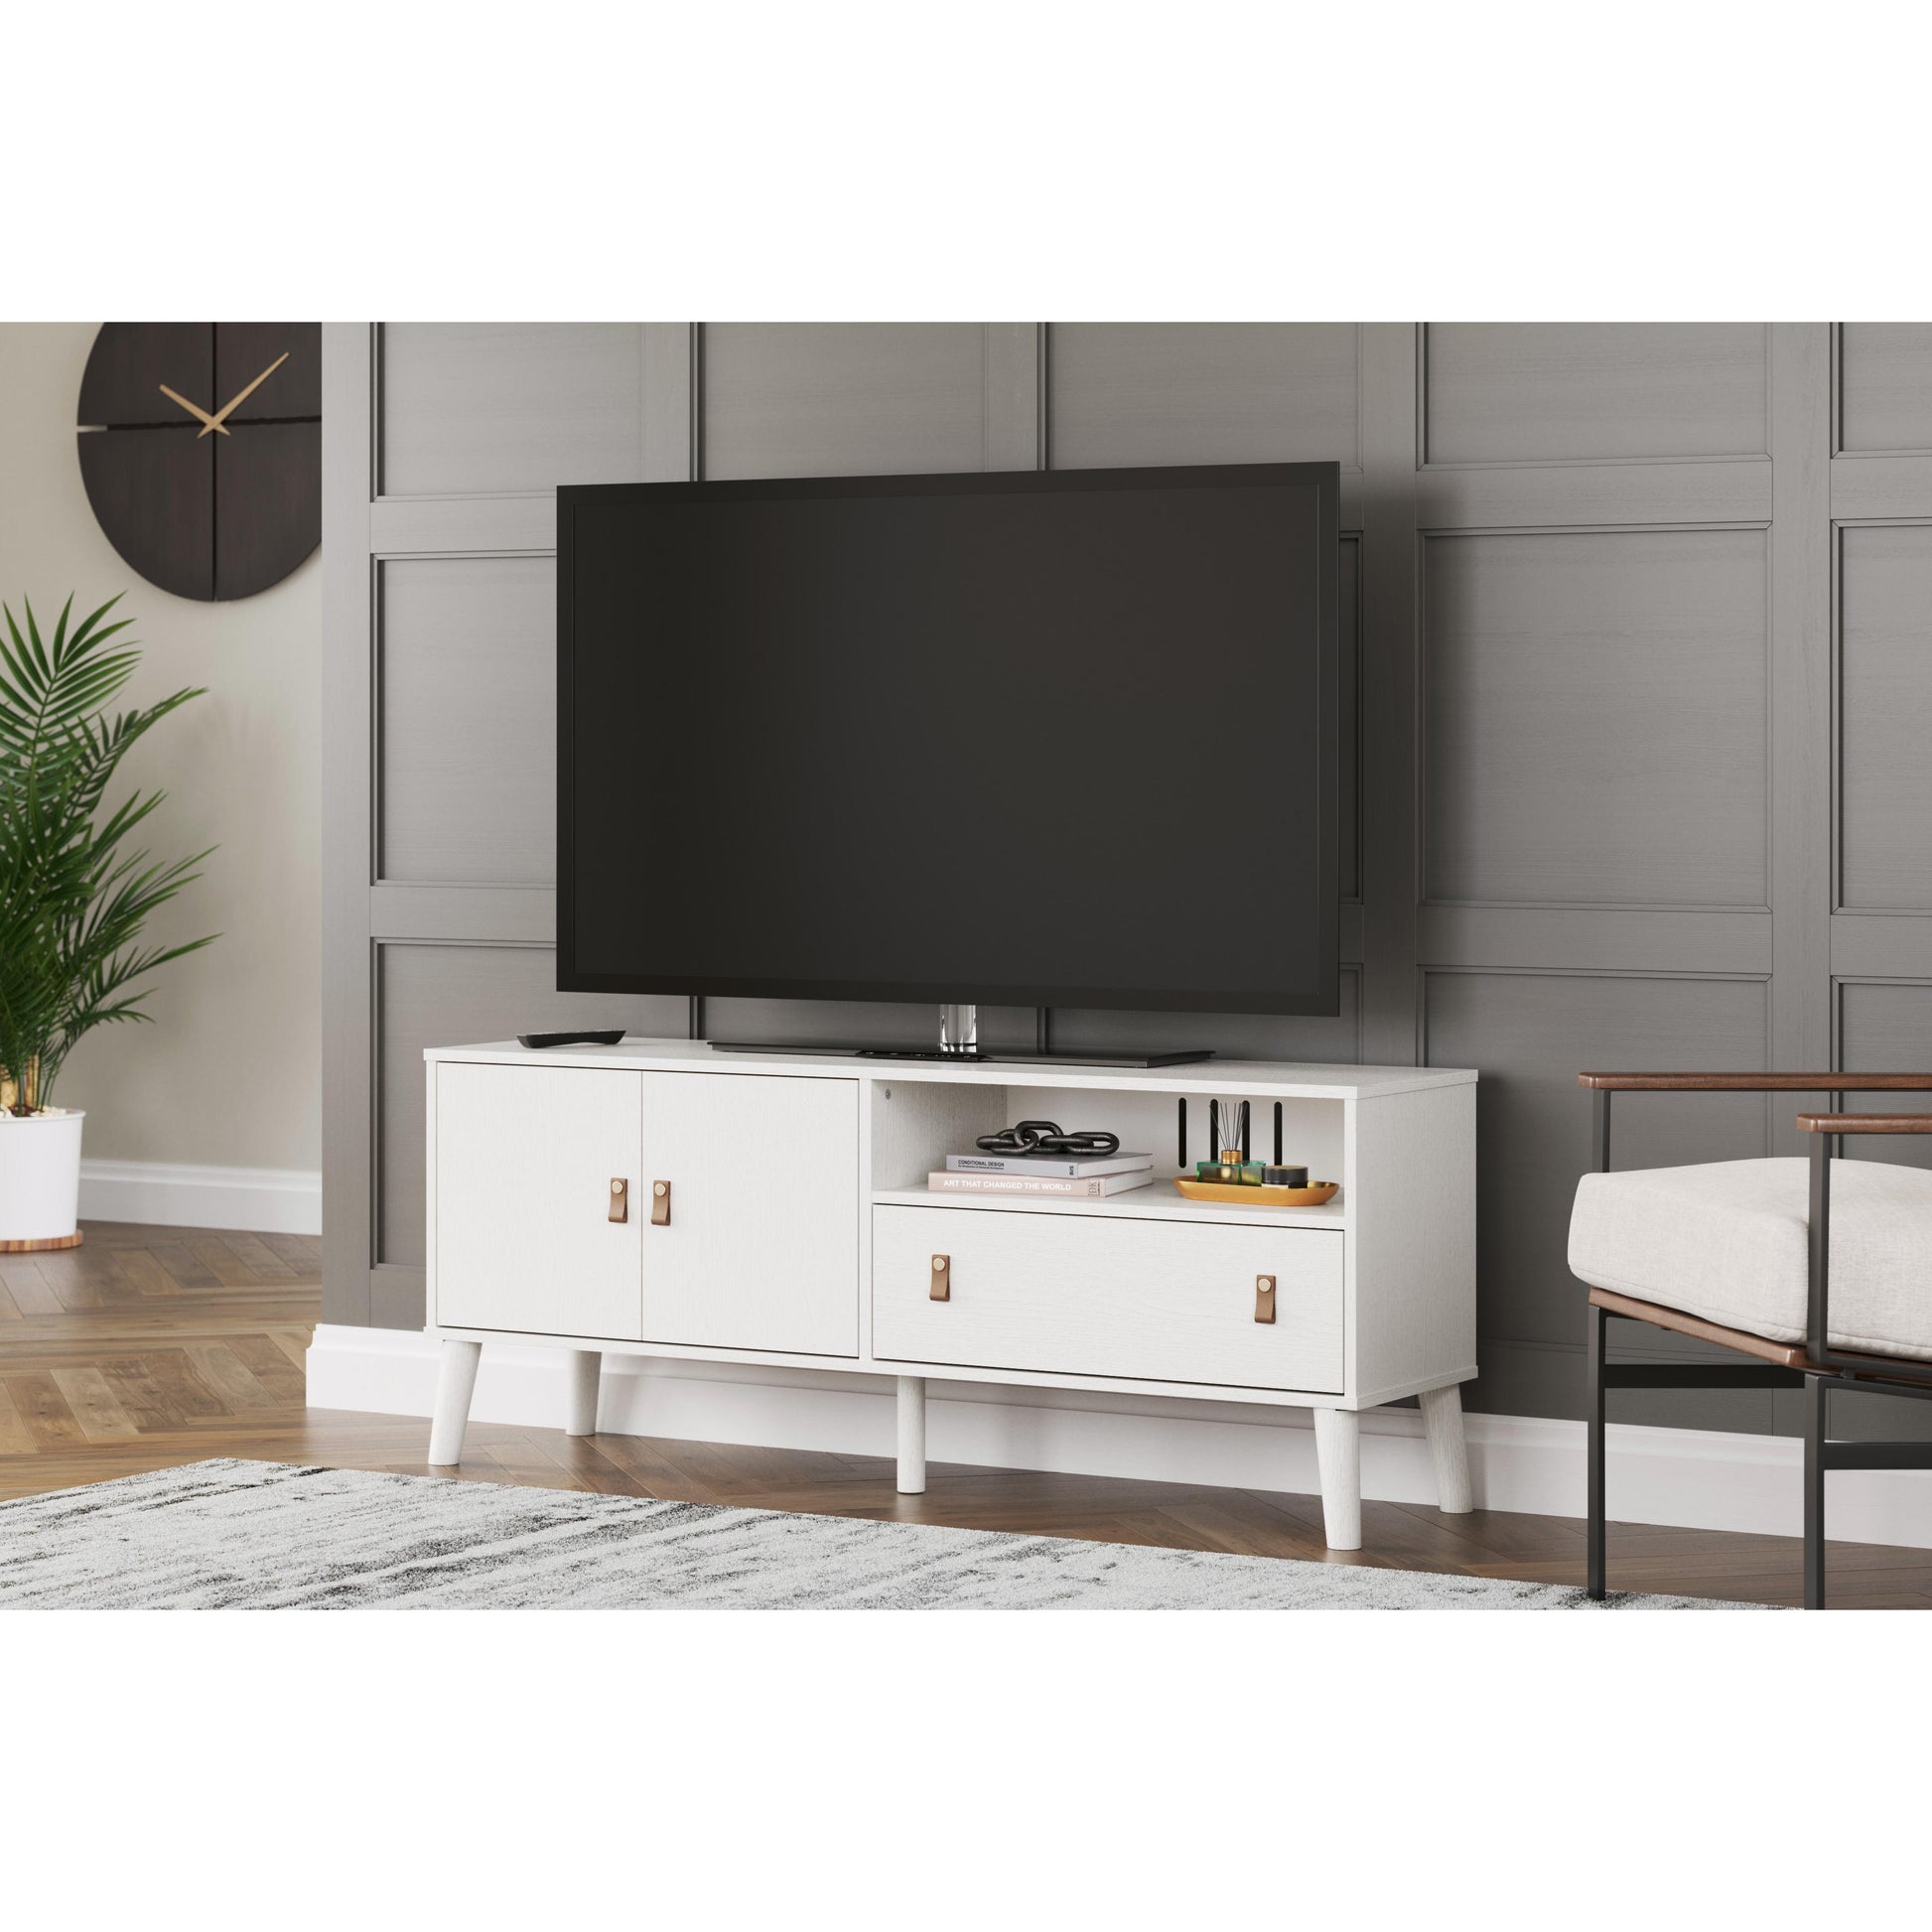 Signature Design by Ashley Aprilyn TV Stand EW1024-268 IMAGE 7